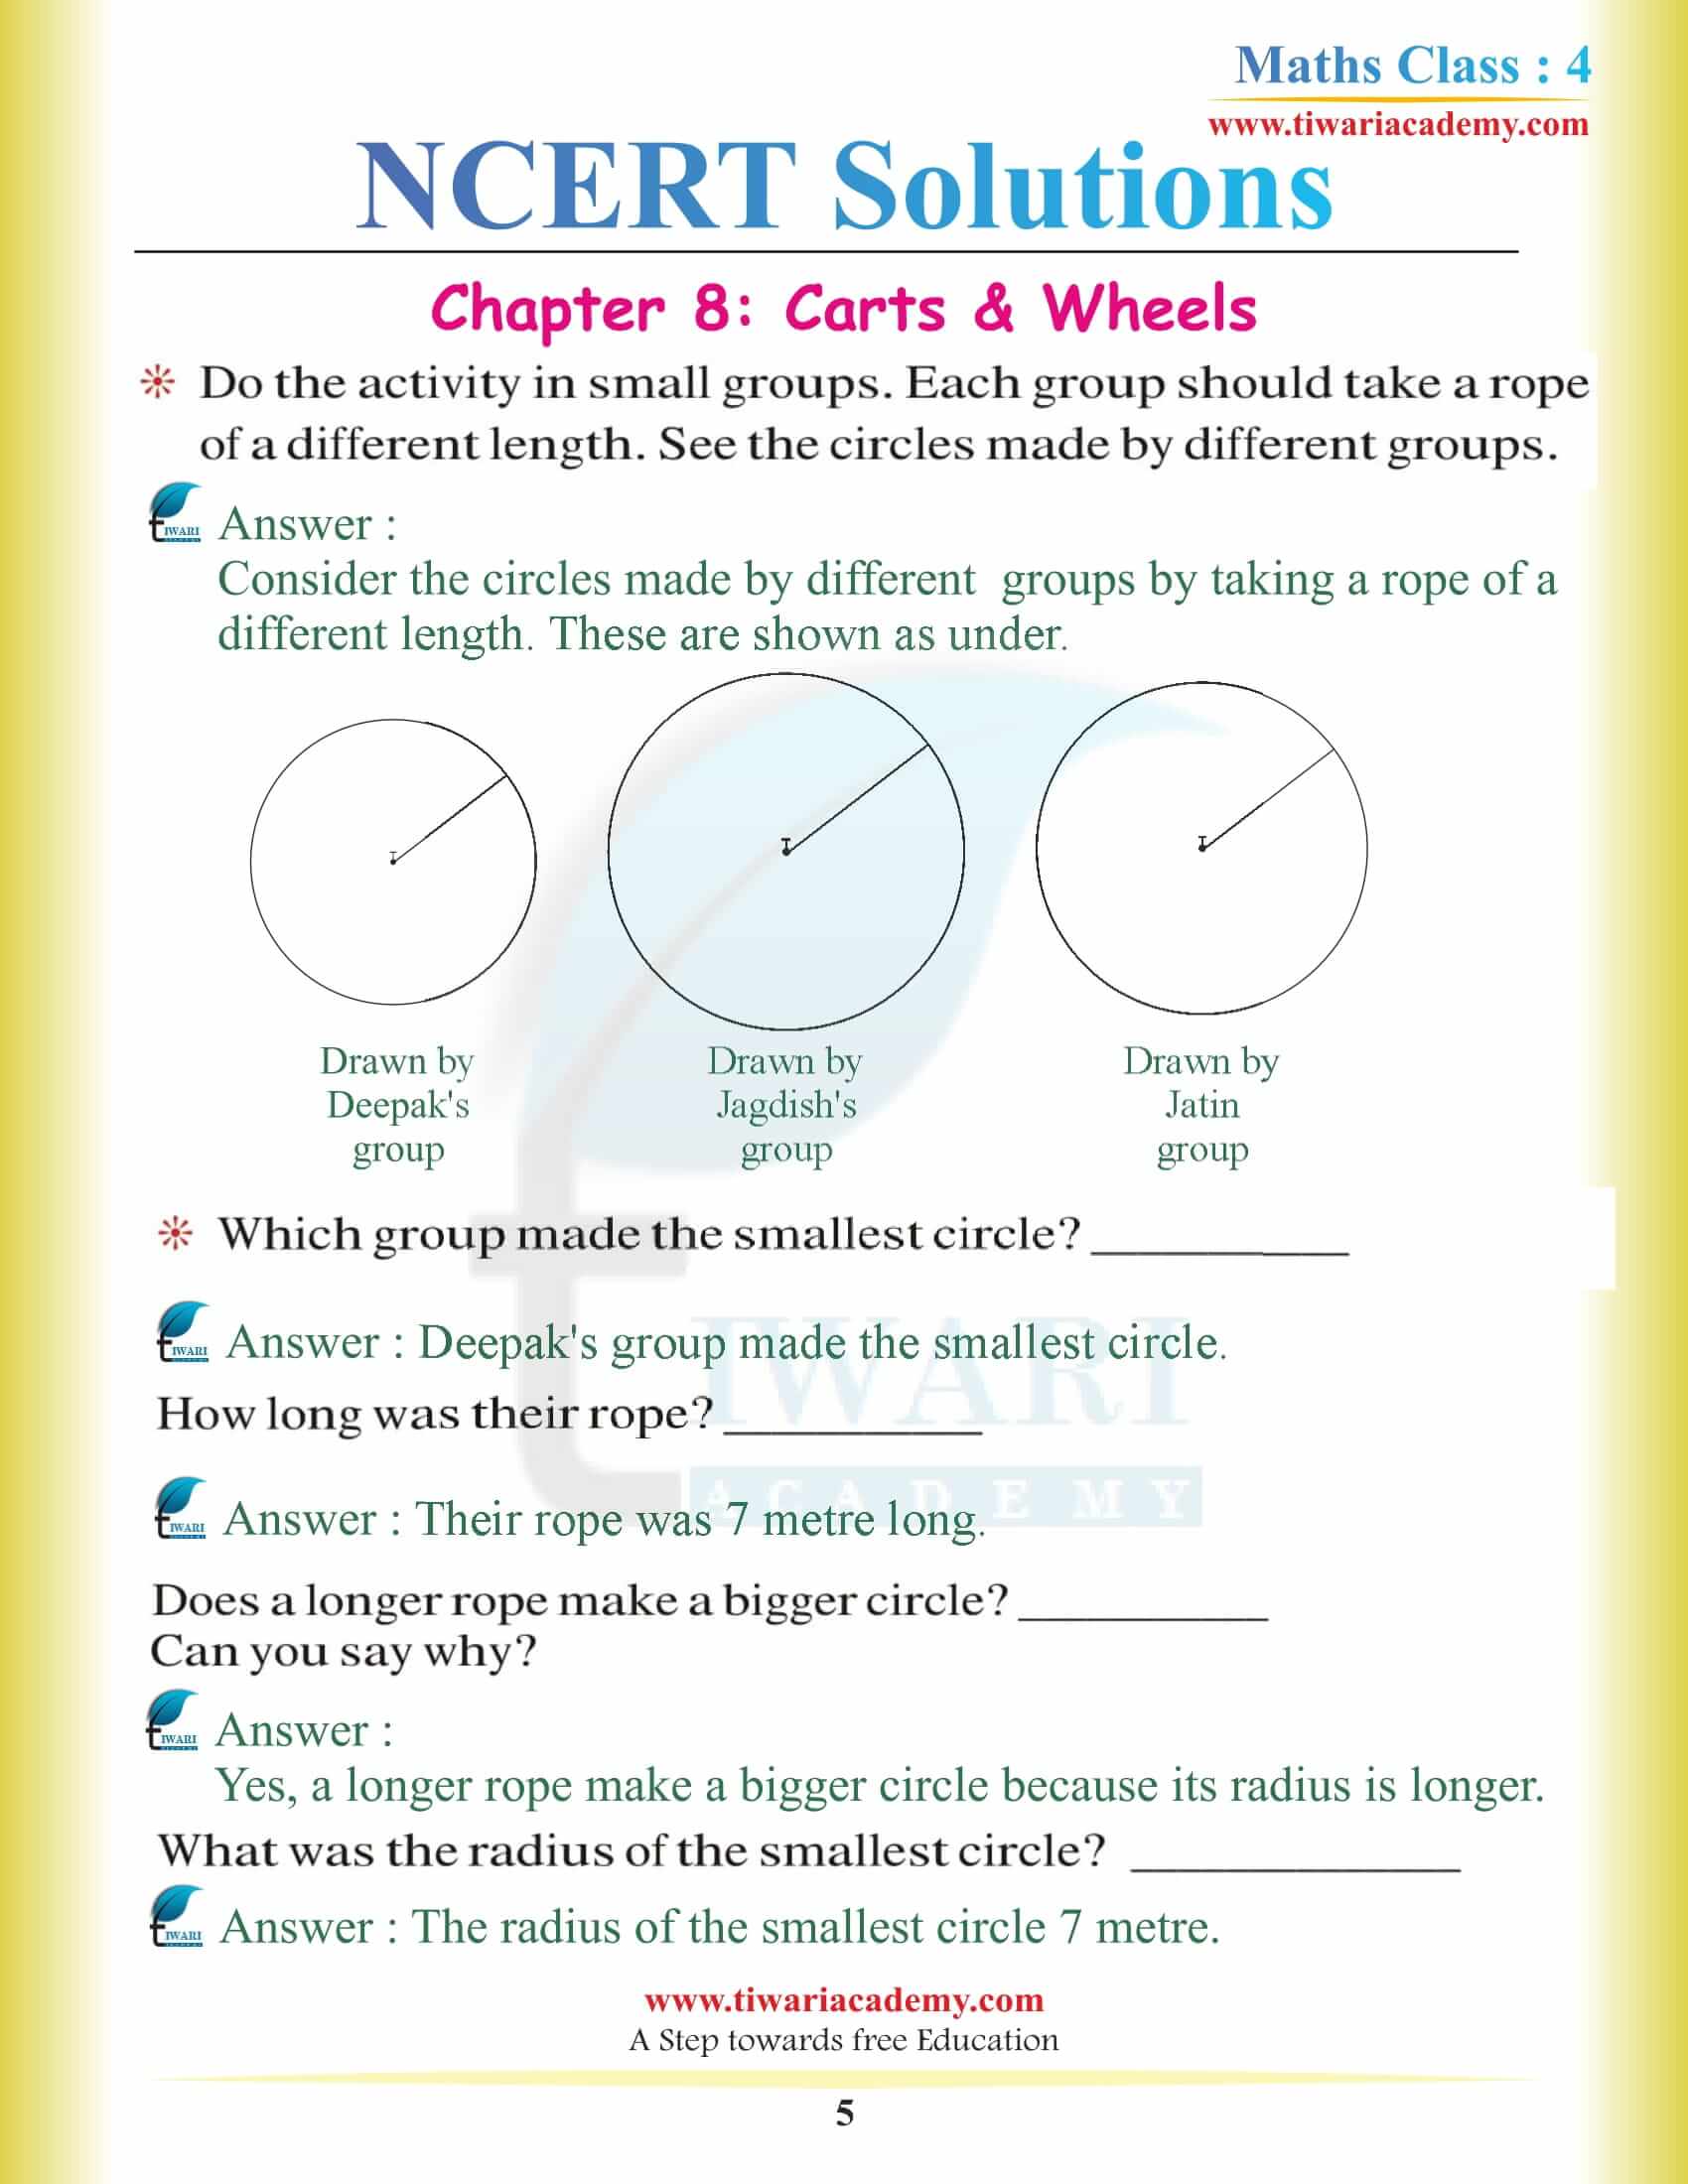 NCERT Solutions for Class 4 Maths Chapter 8 free download